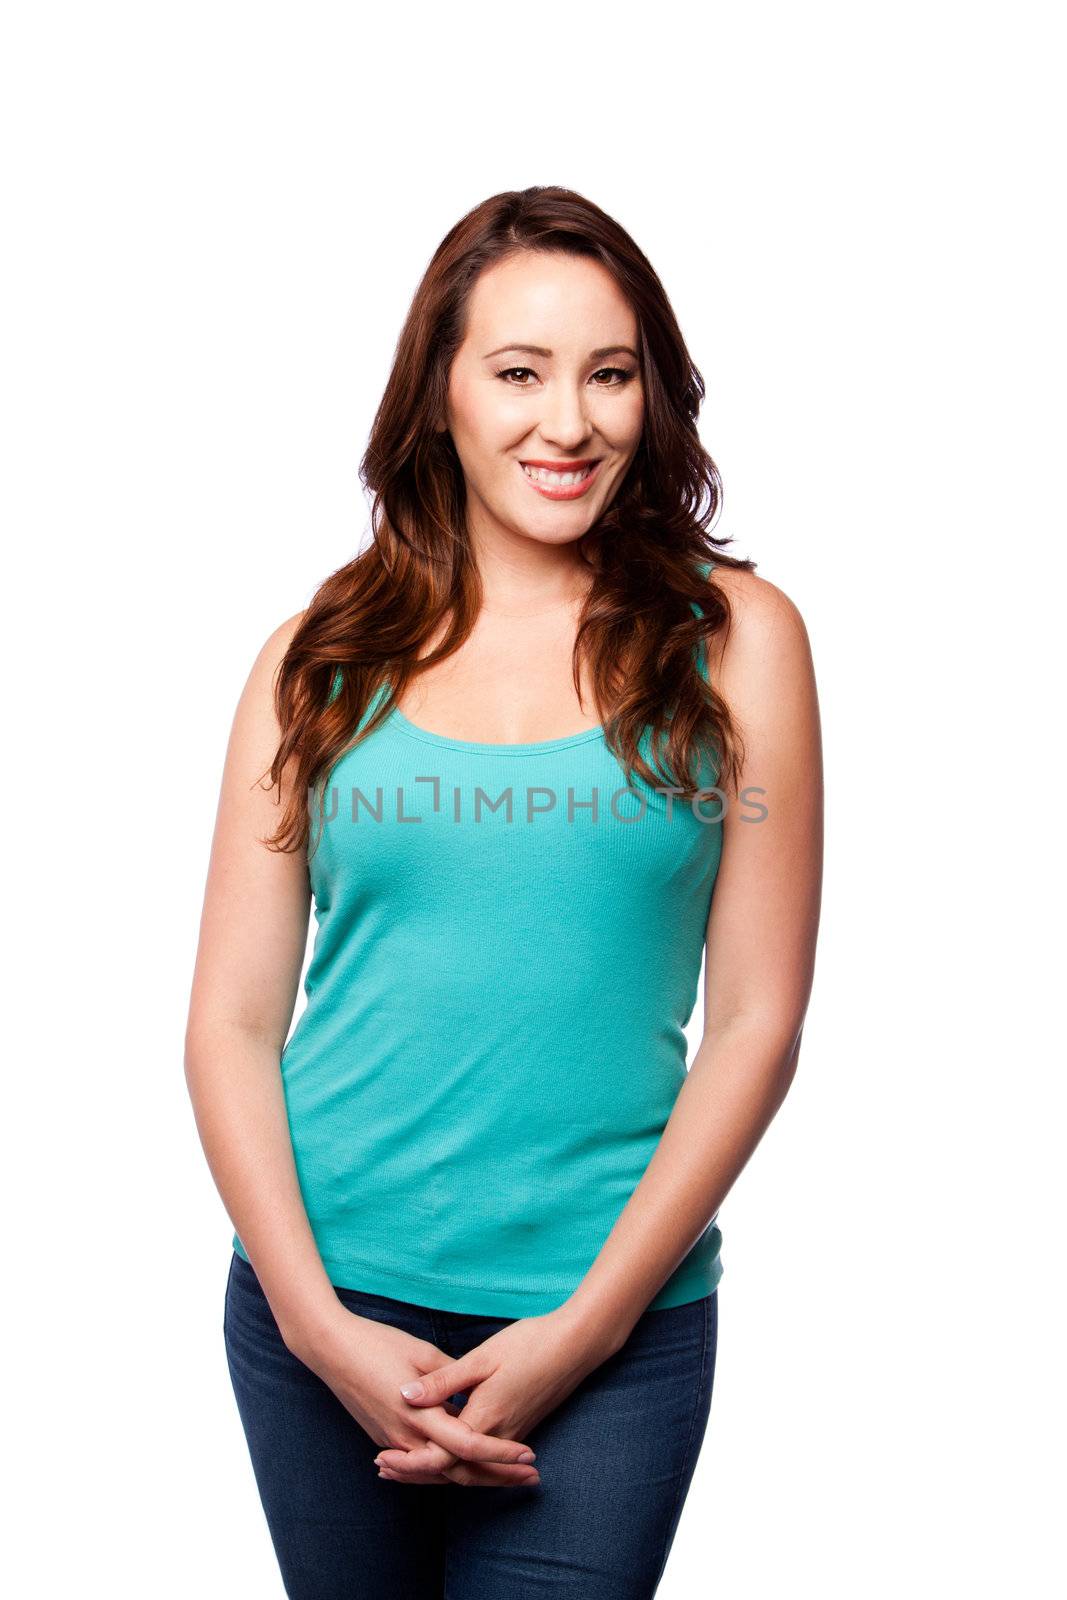 Beautiful Happy smiling young woman standing with hands together, wearing casual green tank top, isolated.